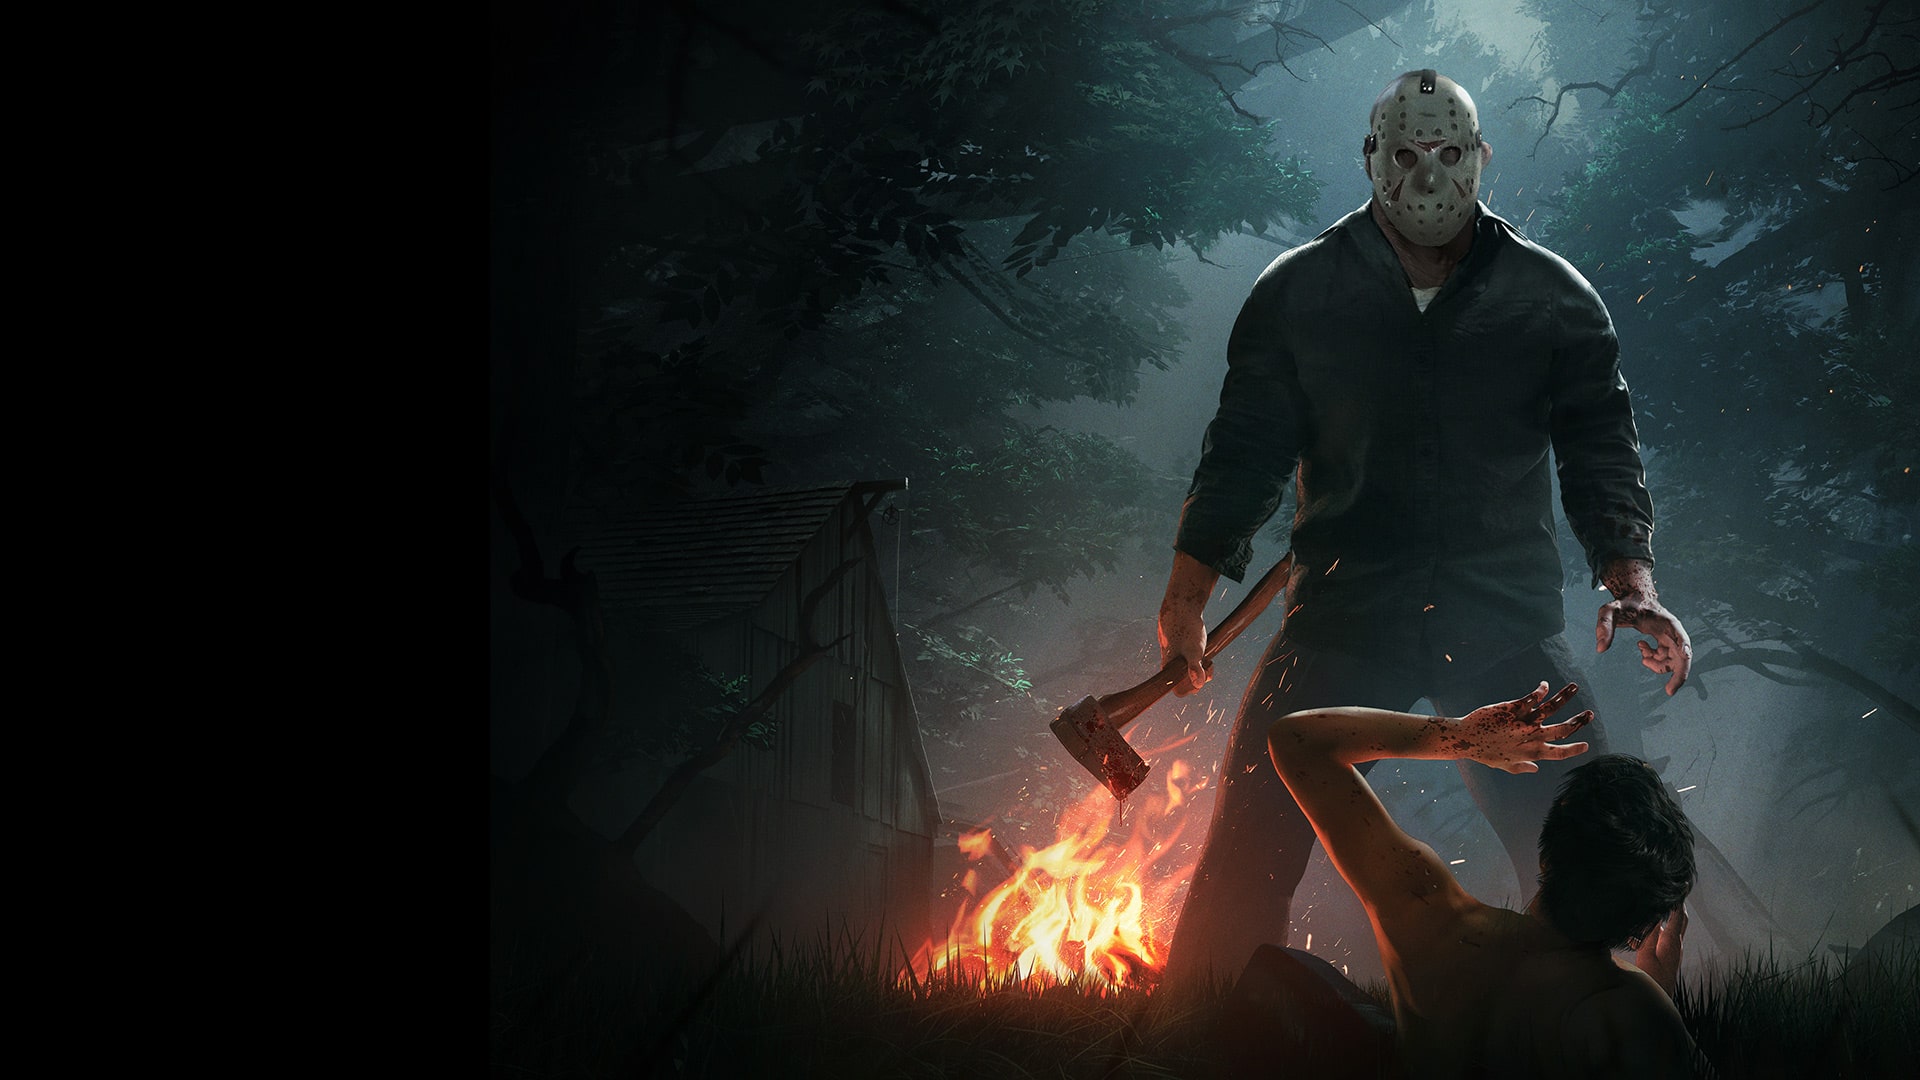 Friday the 13th Playstation 4 Game